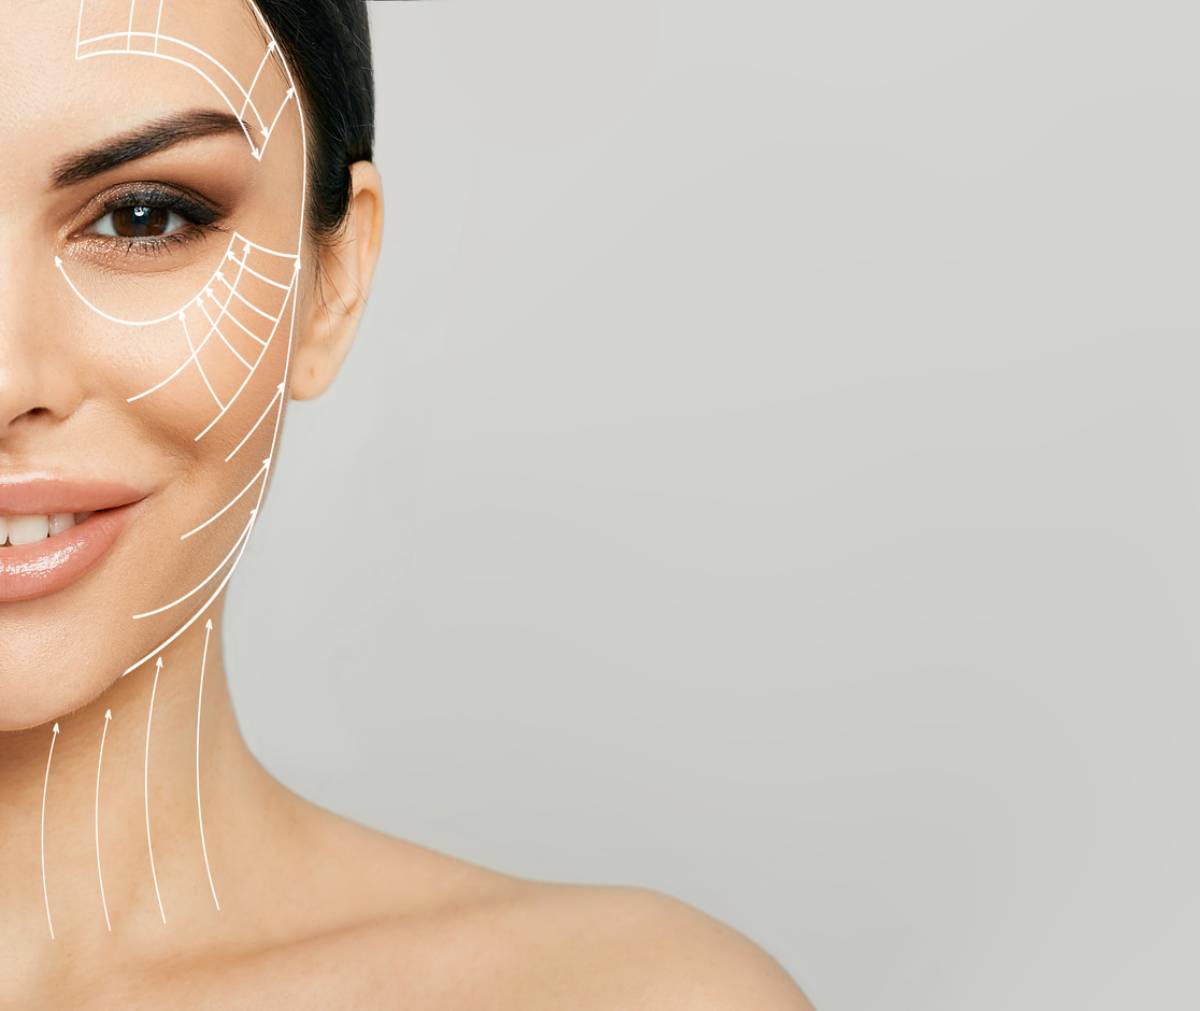 The image shows the different alterations that can be made to a person's face and helps to answer the question, "Are a cheek lift and a midface lift different ?".